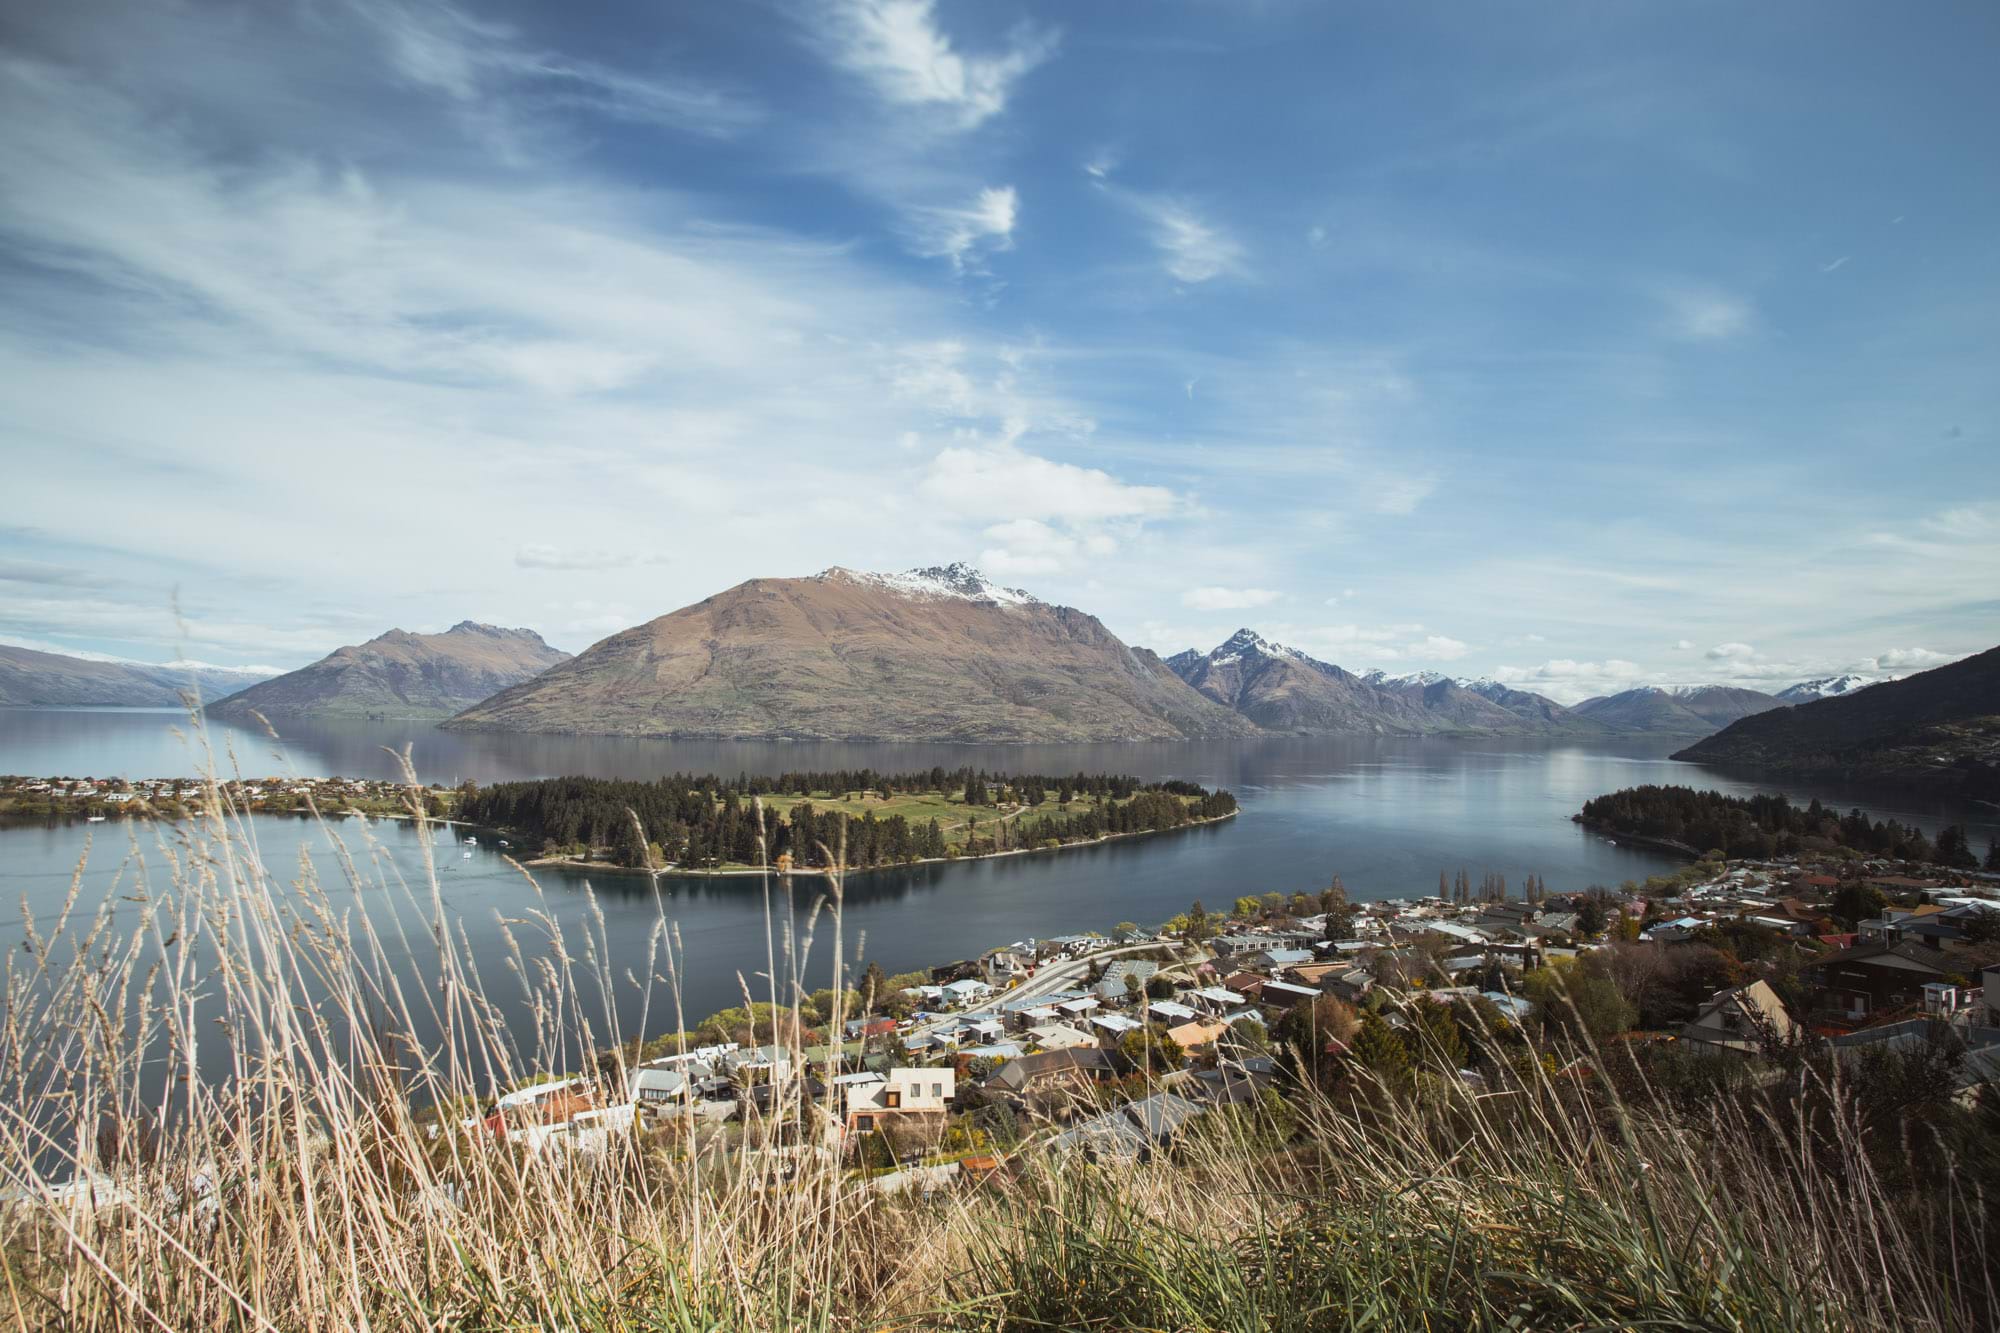 Scenic views over Queenstown of Lake Wakatipu and the Remarkables